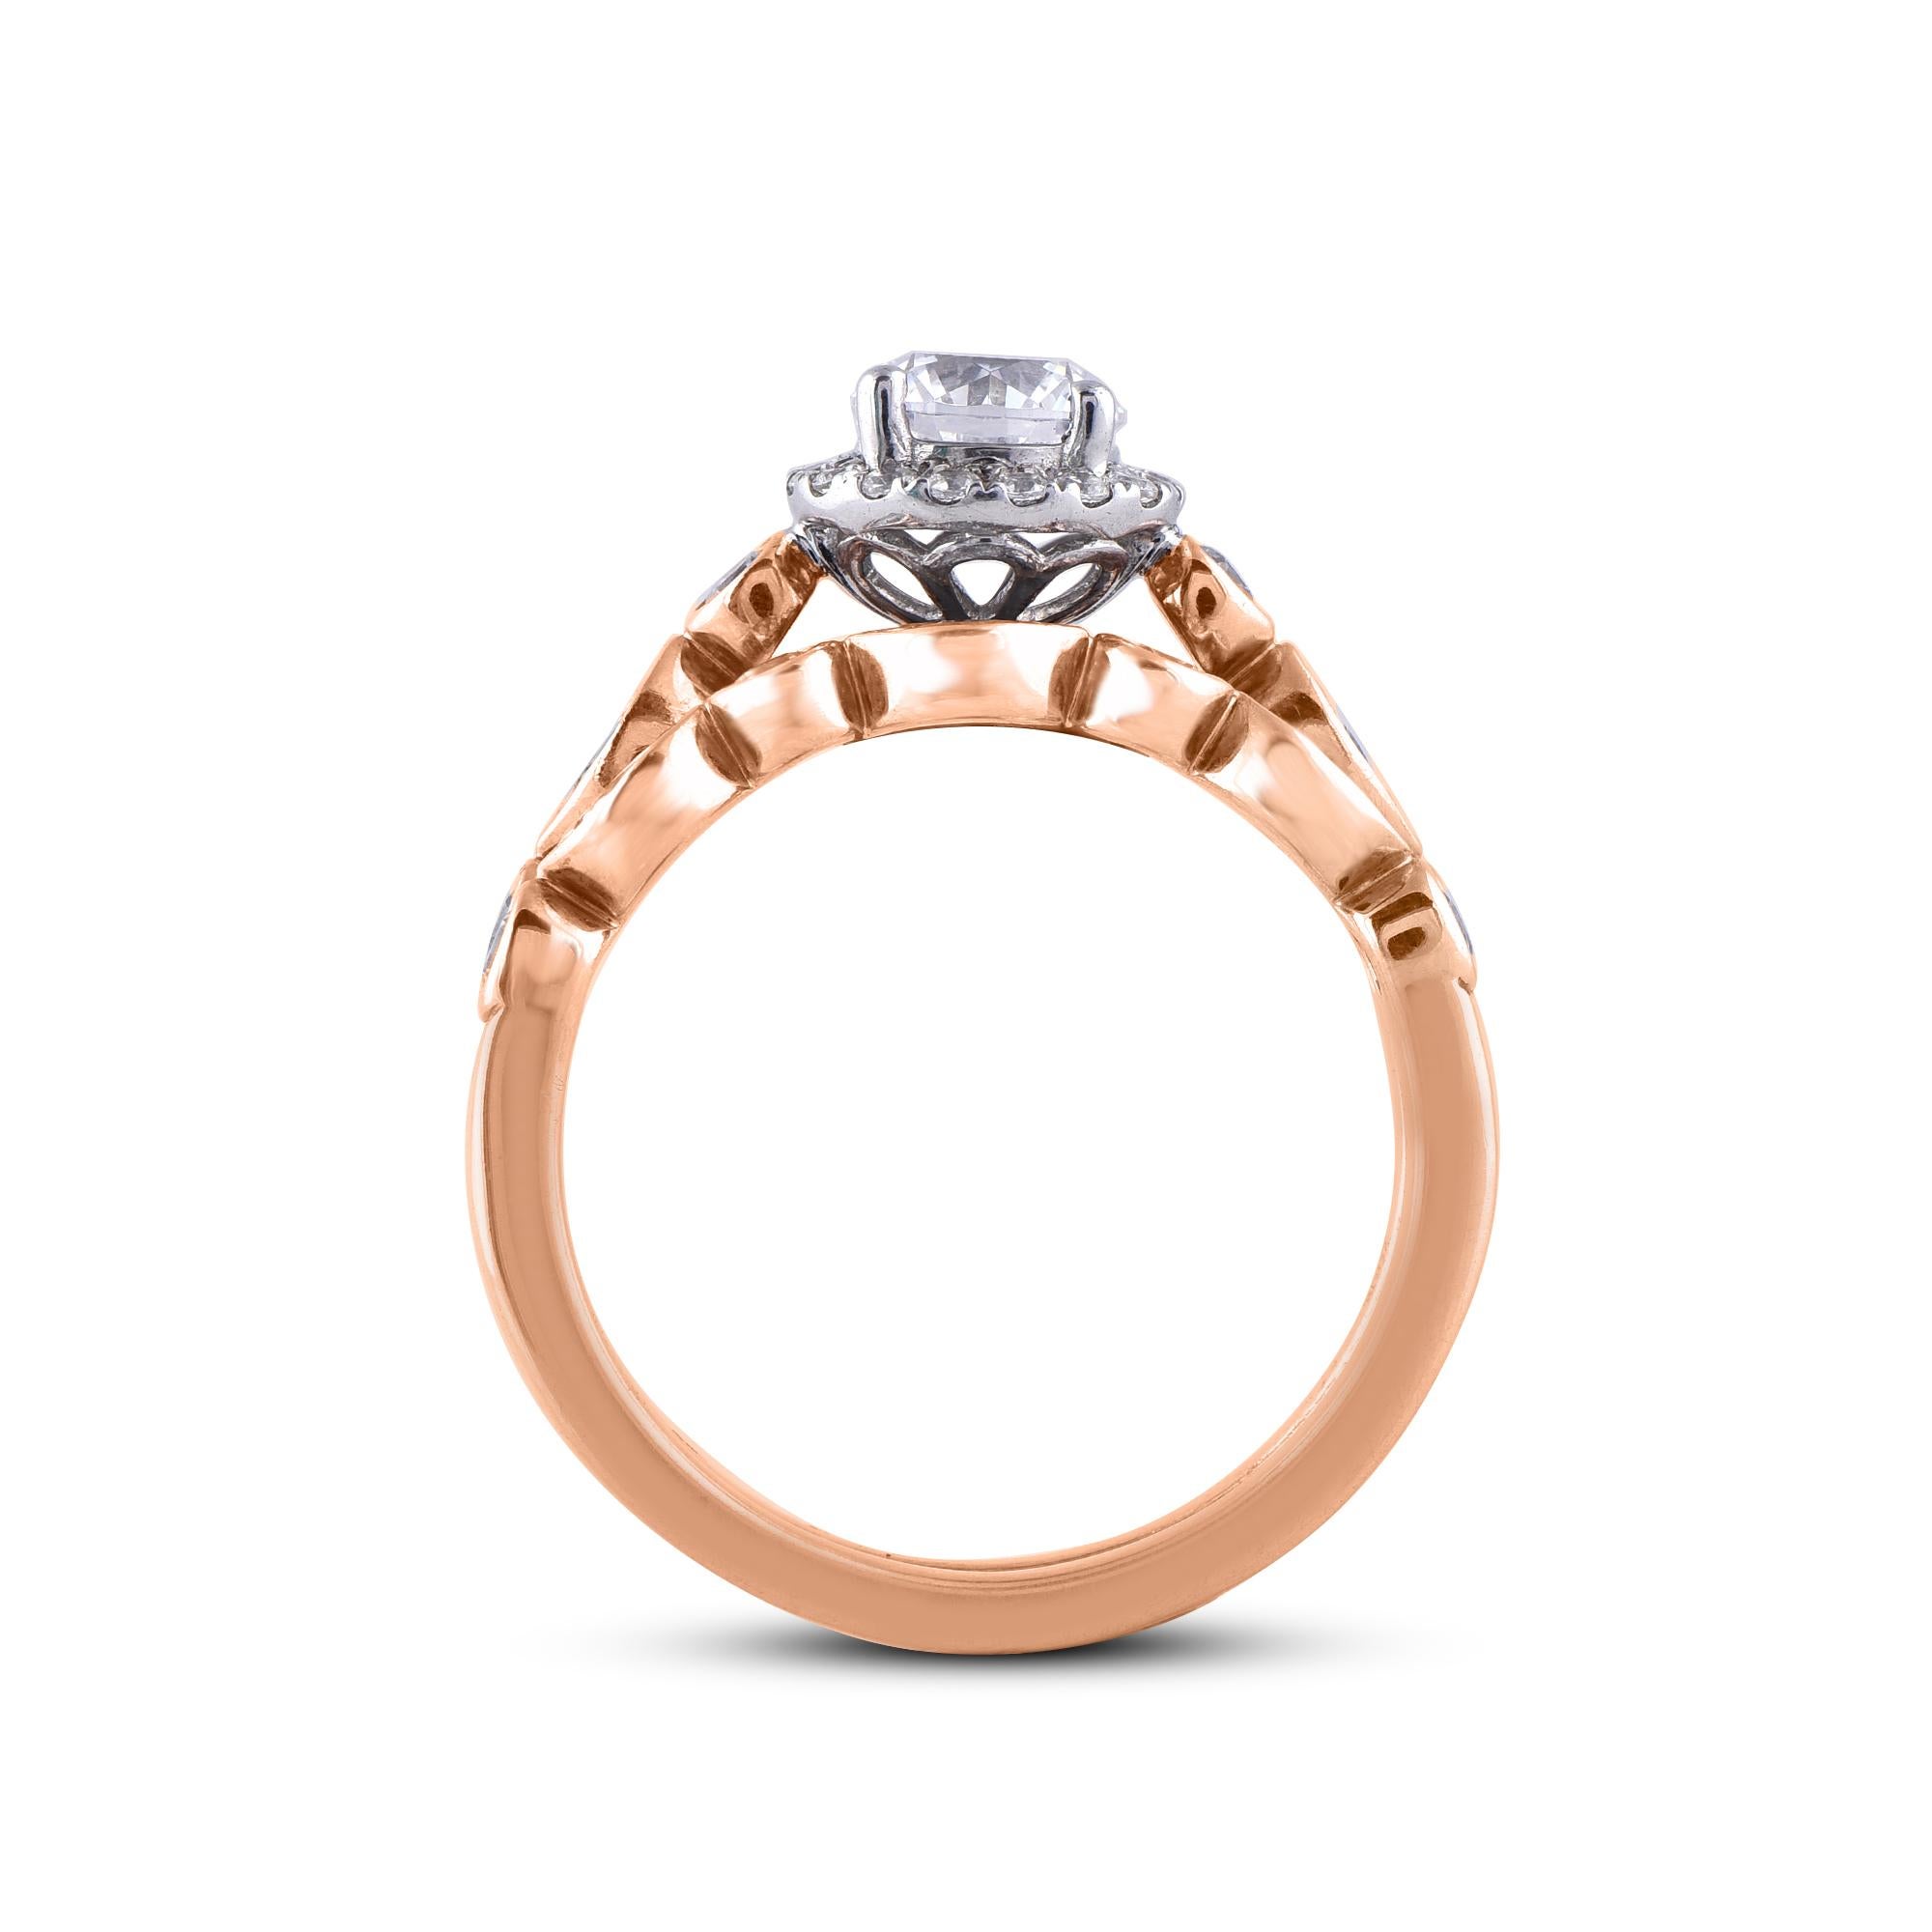 TJD 1.20 Carat Round Diamond 18 Karat Rose Gold Halo Designer Bridal Ring Set In New Condition For Sale In New York, NY